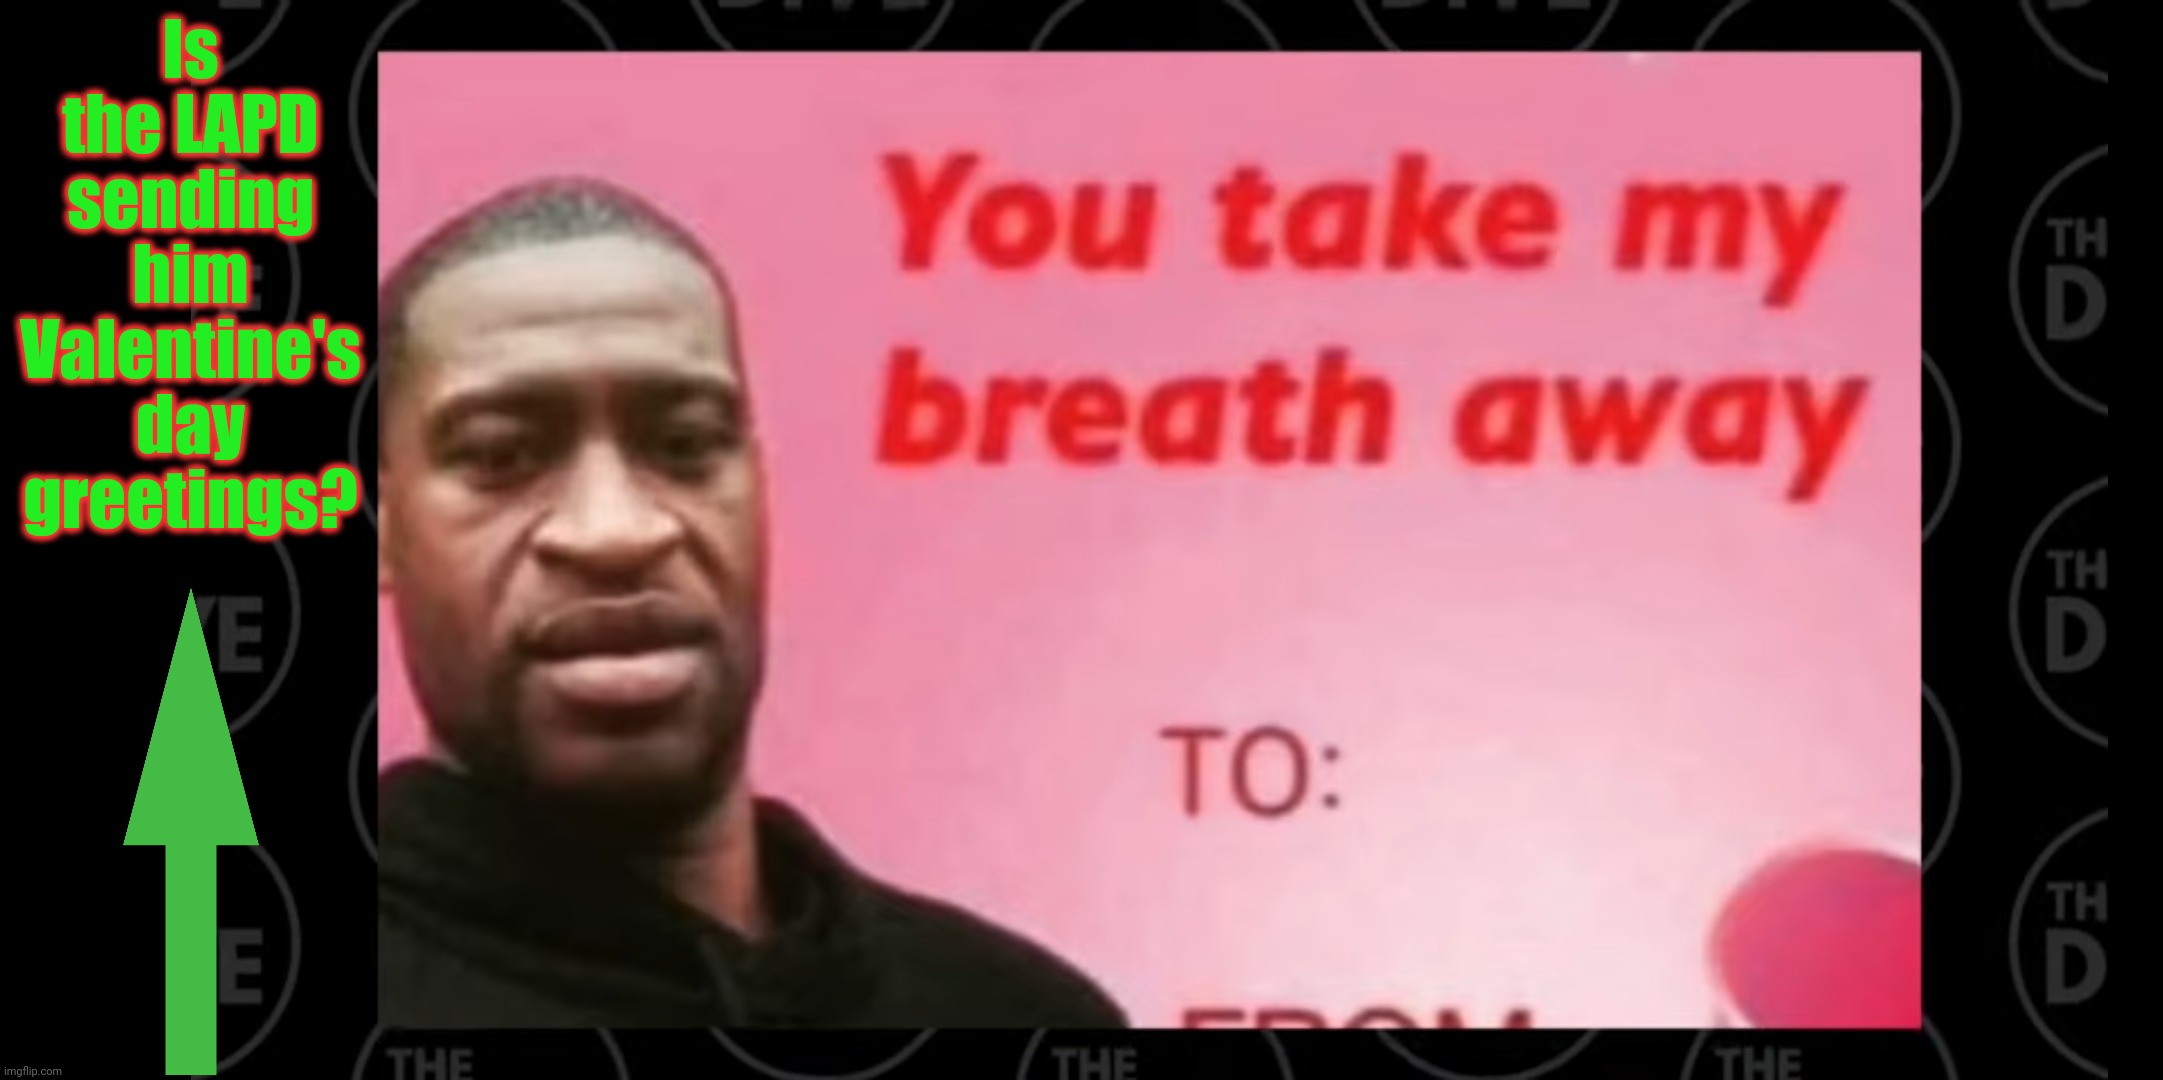 Is the LAPD sending him Valentine's day greetings? | made w/ Imgflip meme maker